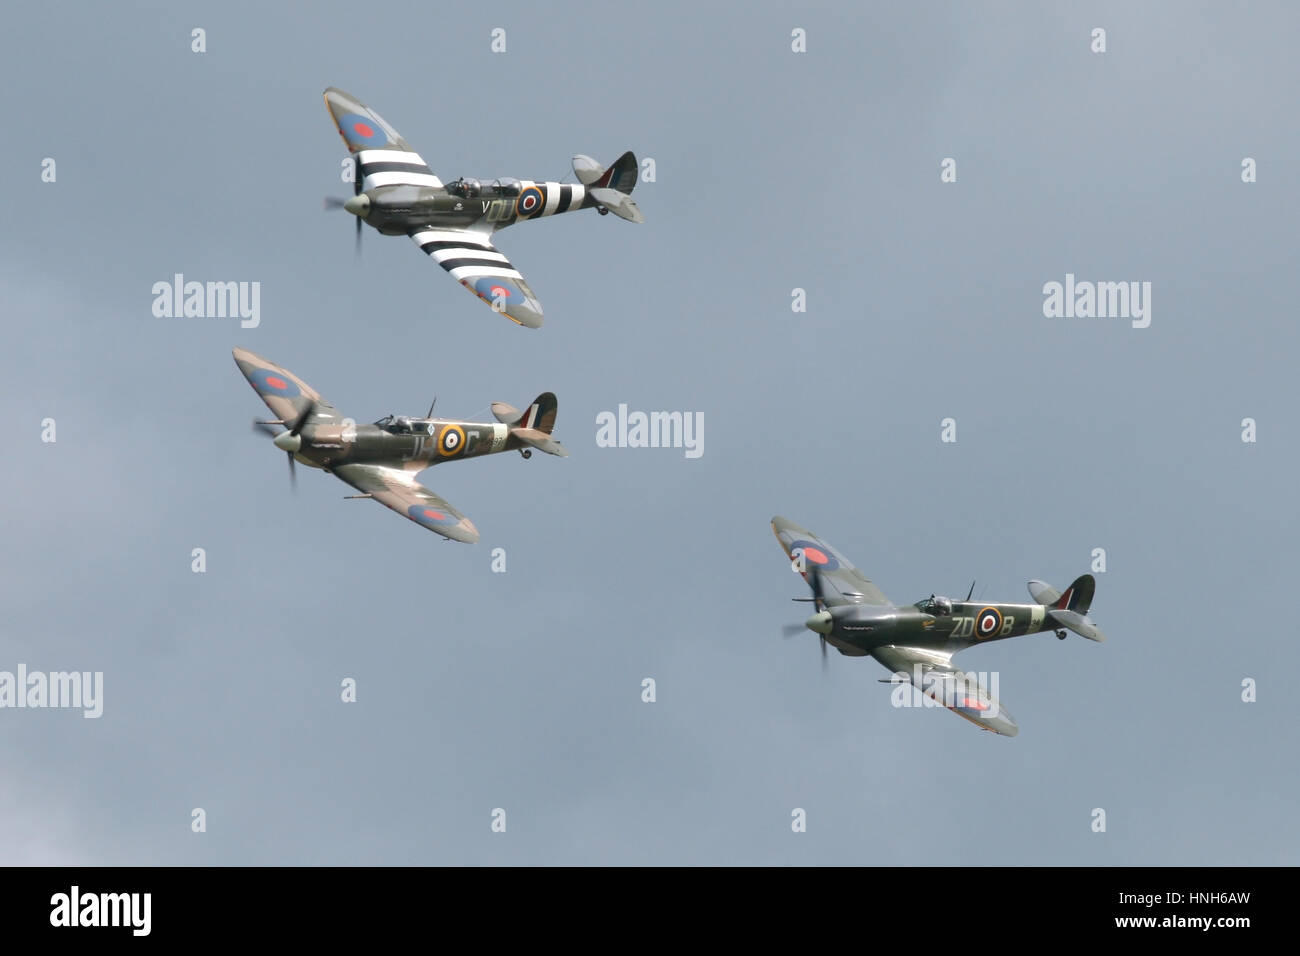 Three Supermarine Spitfires, a MkV, MkIX and a T9 in a vic of three with a flypast at a Duxford airshow. Stock Photo